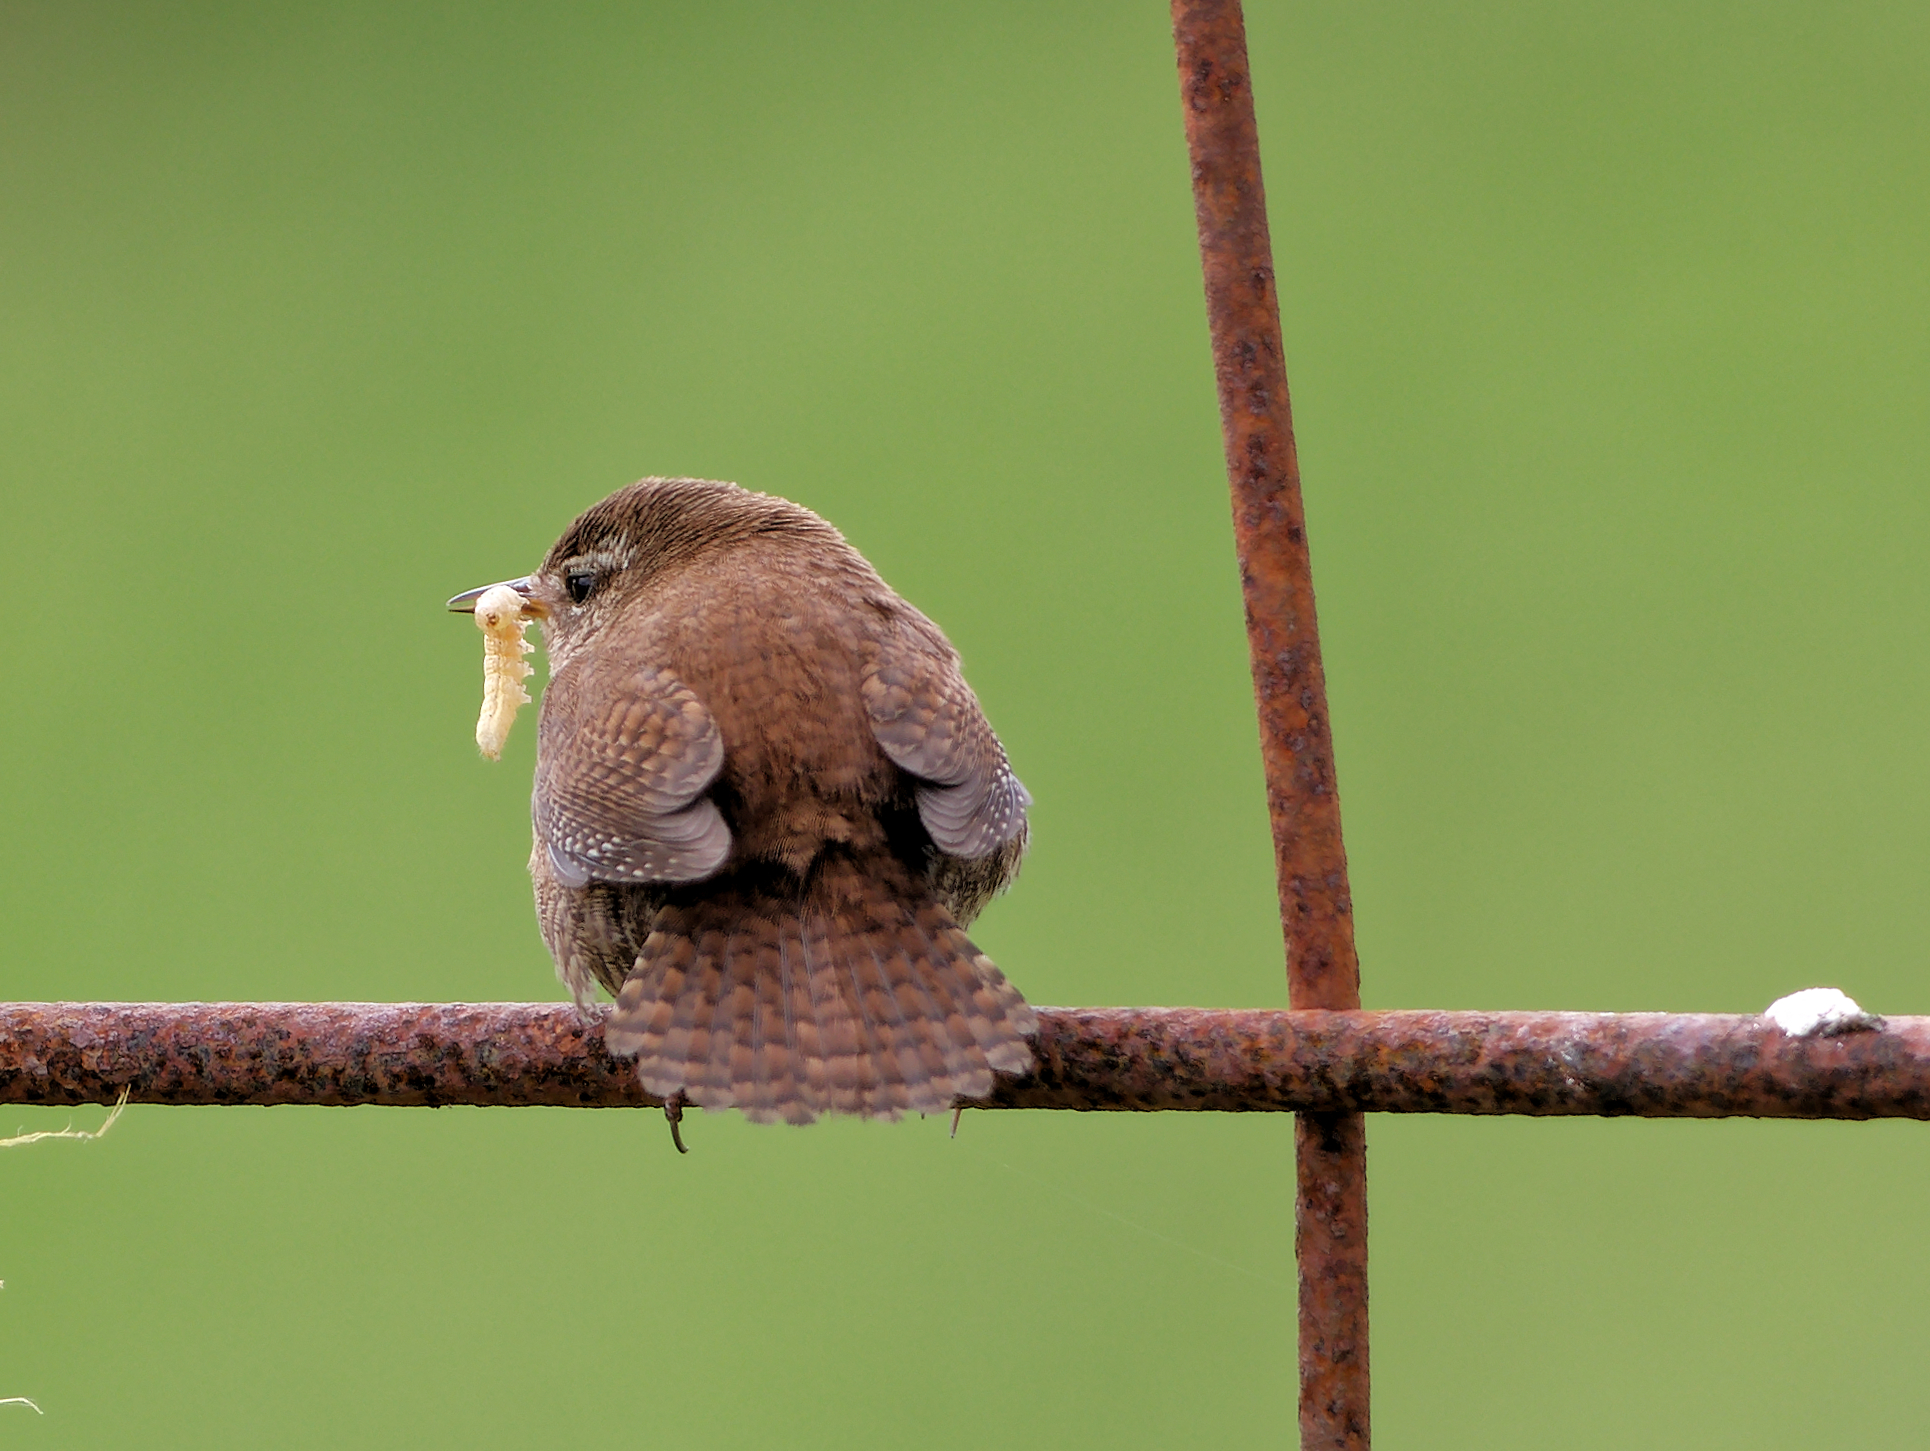 Just a Hungry Wren